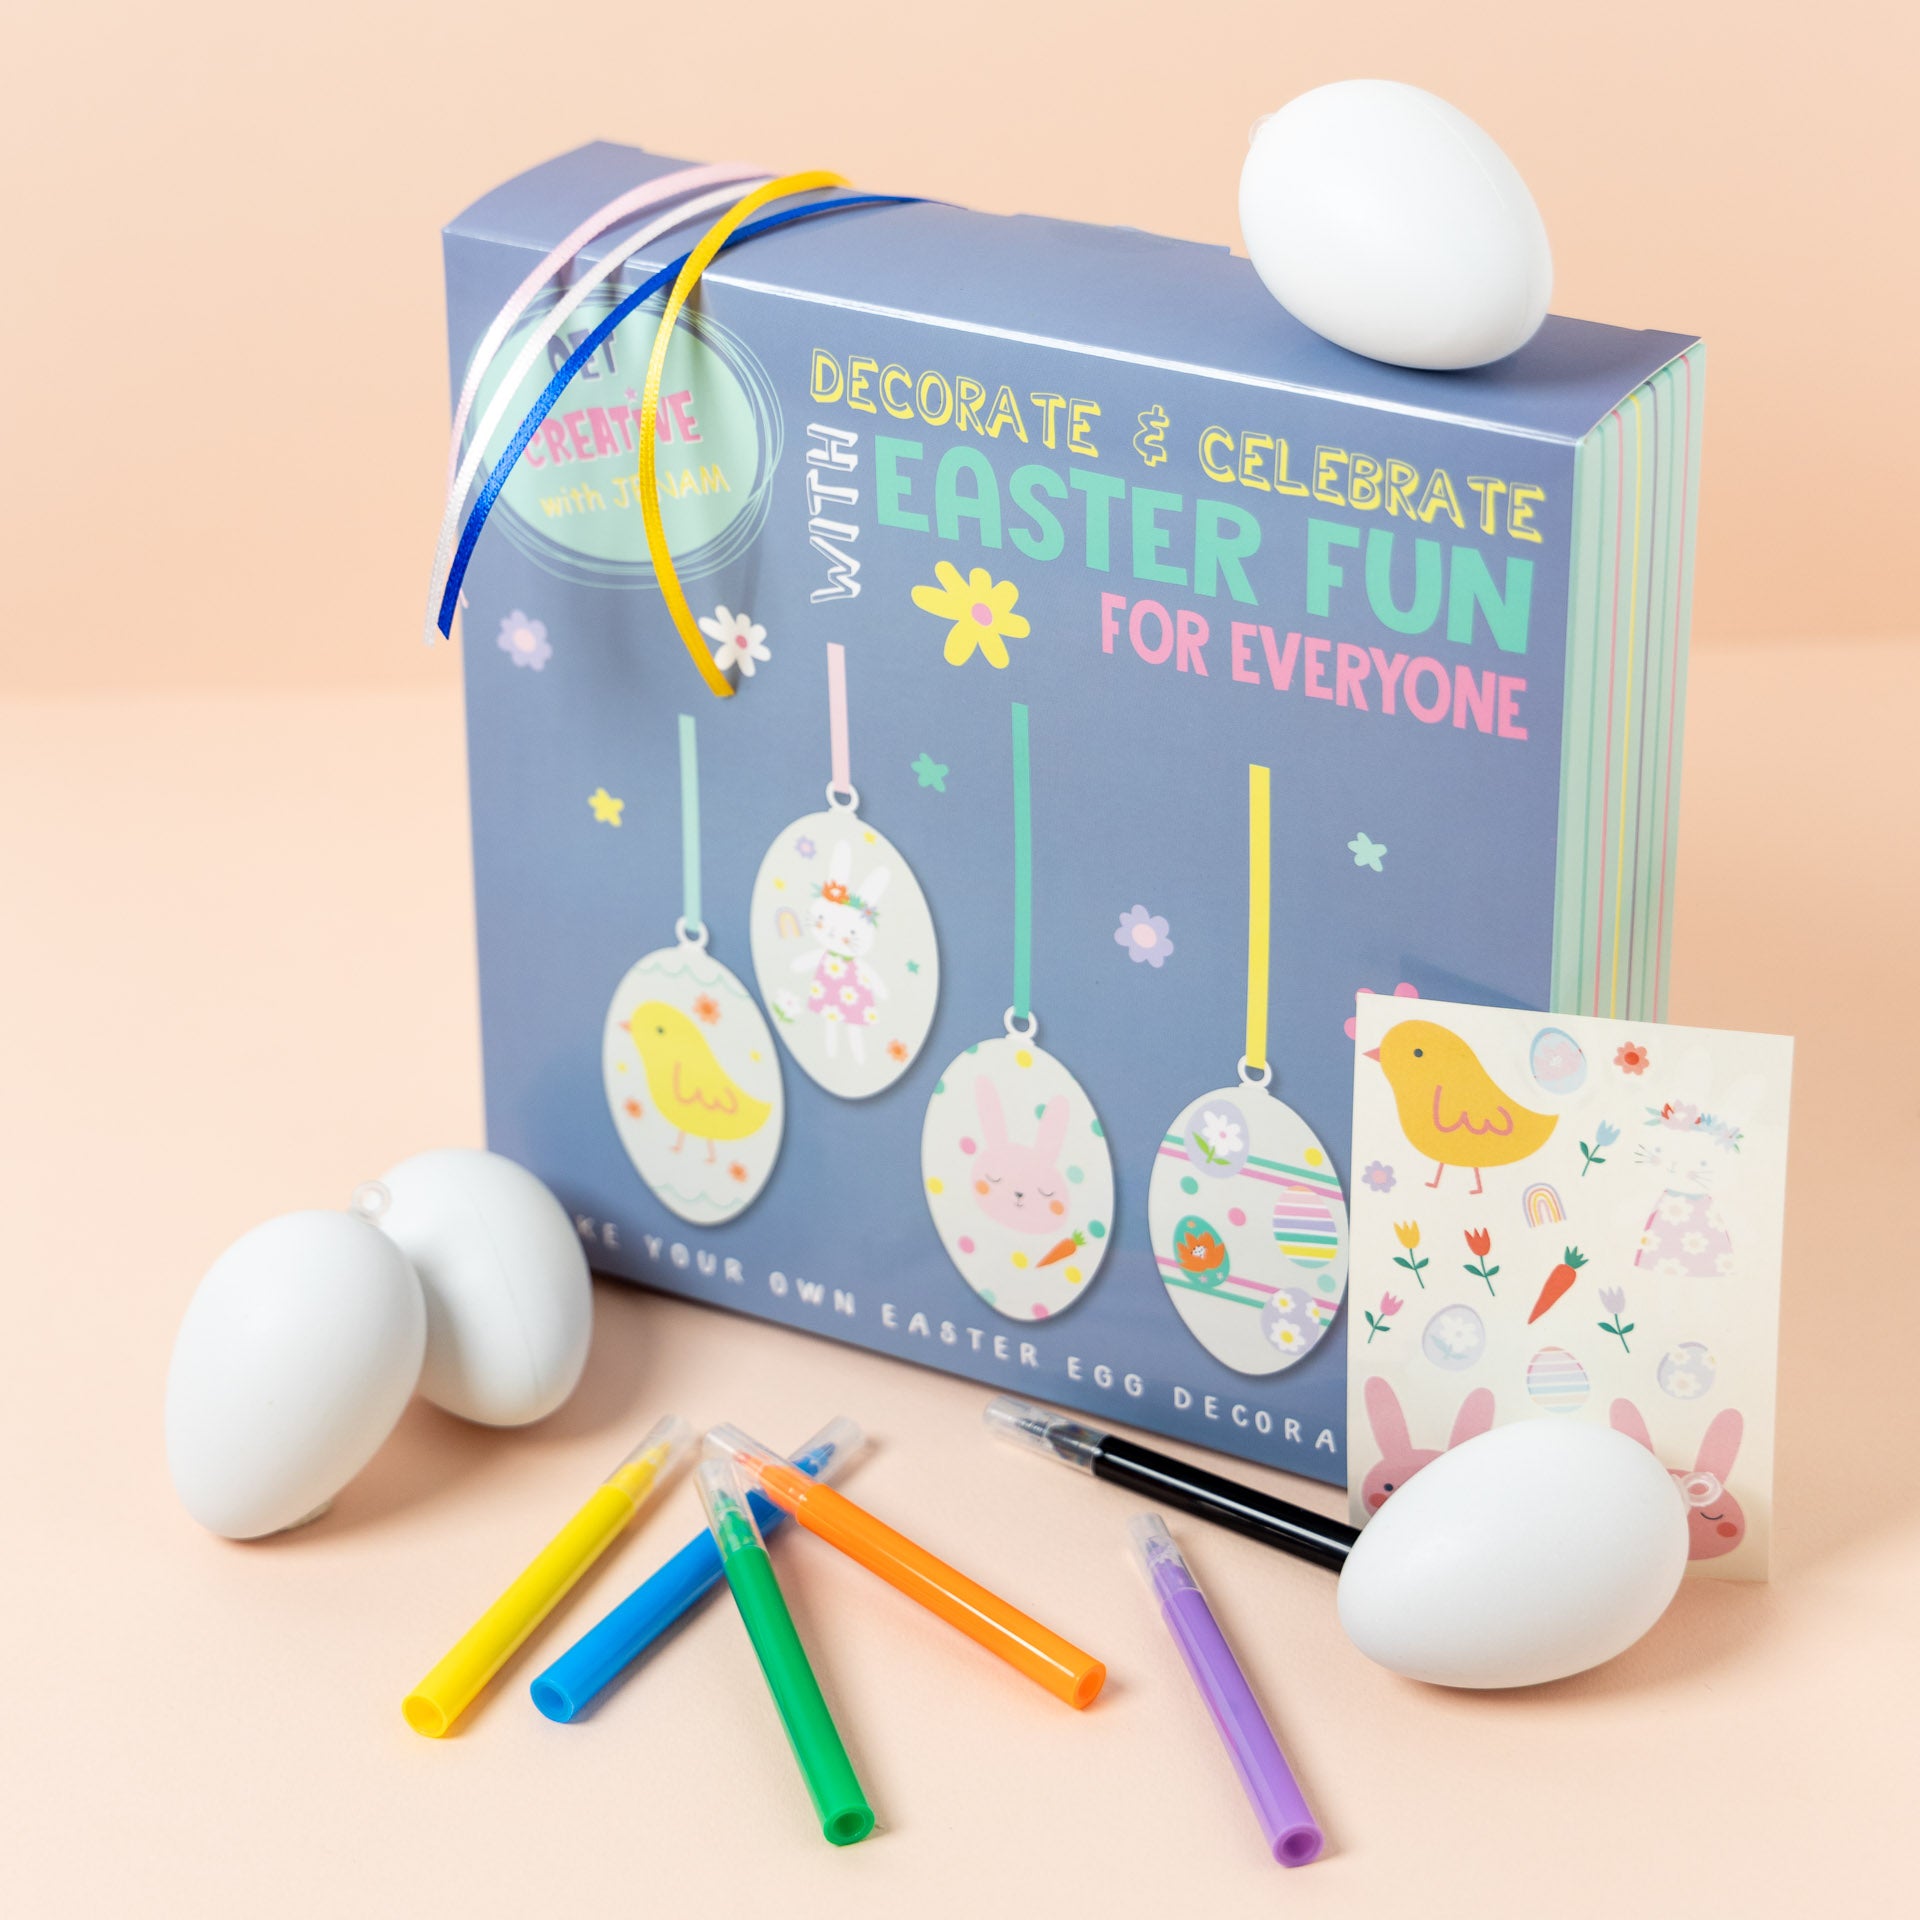 Make Your Own Easter Egg Decorations